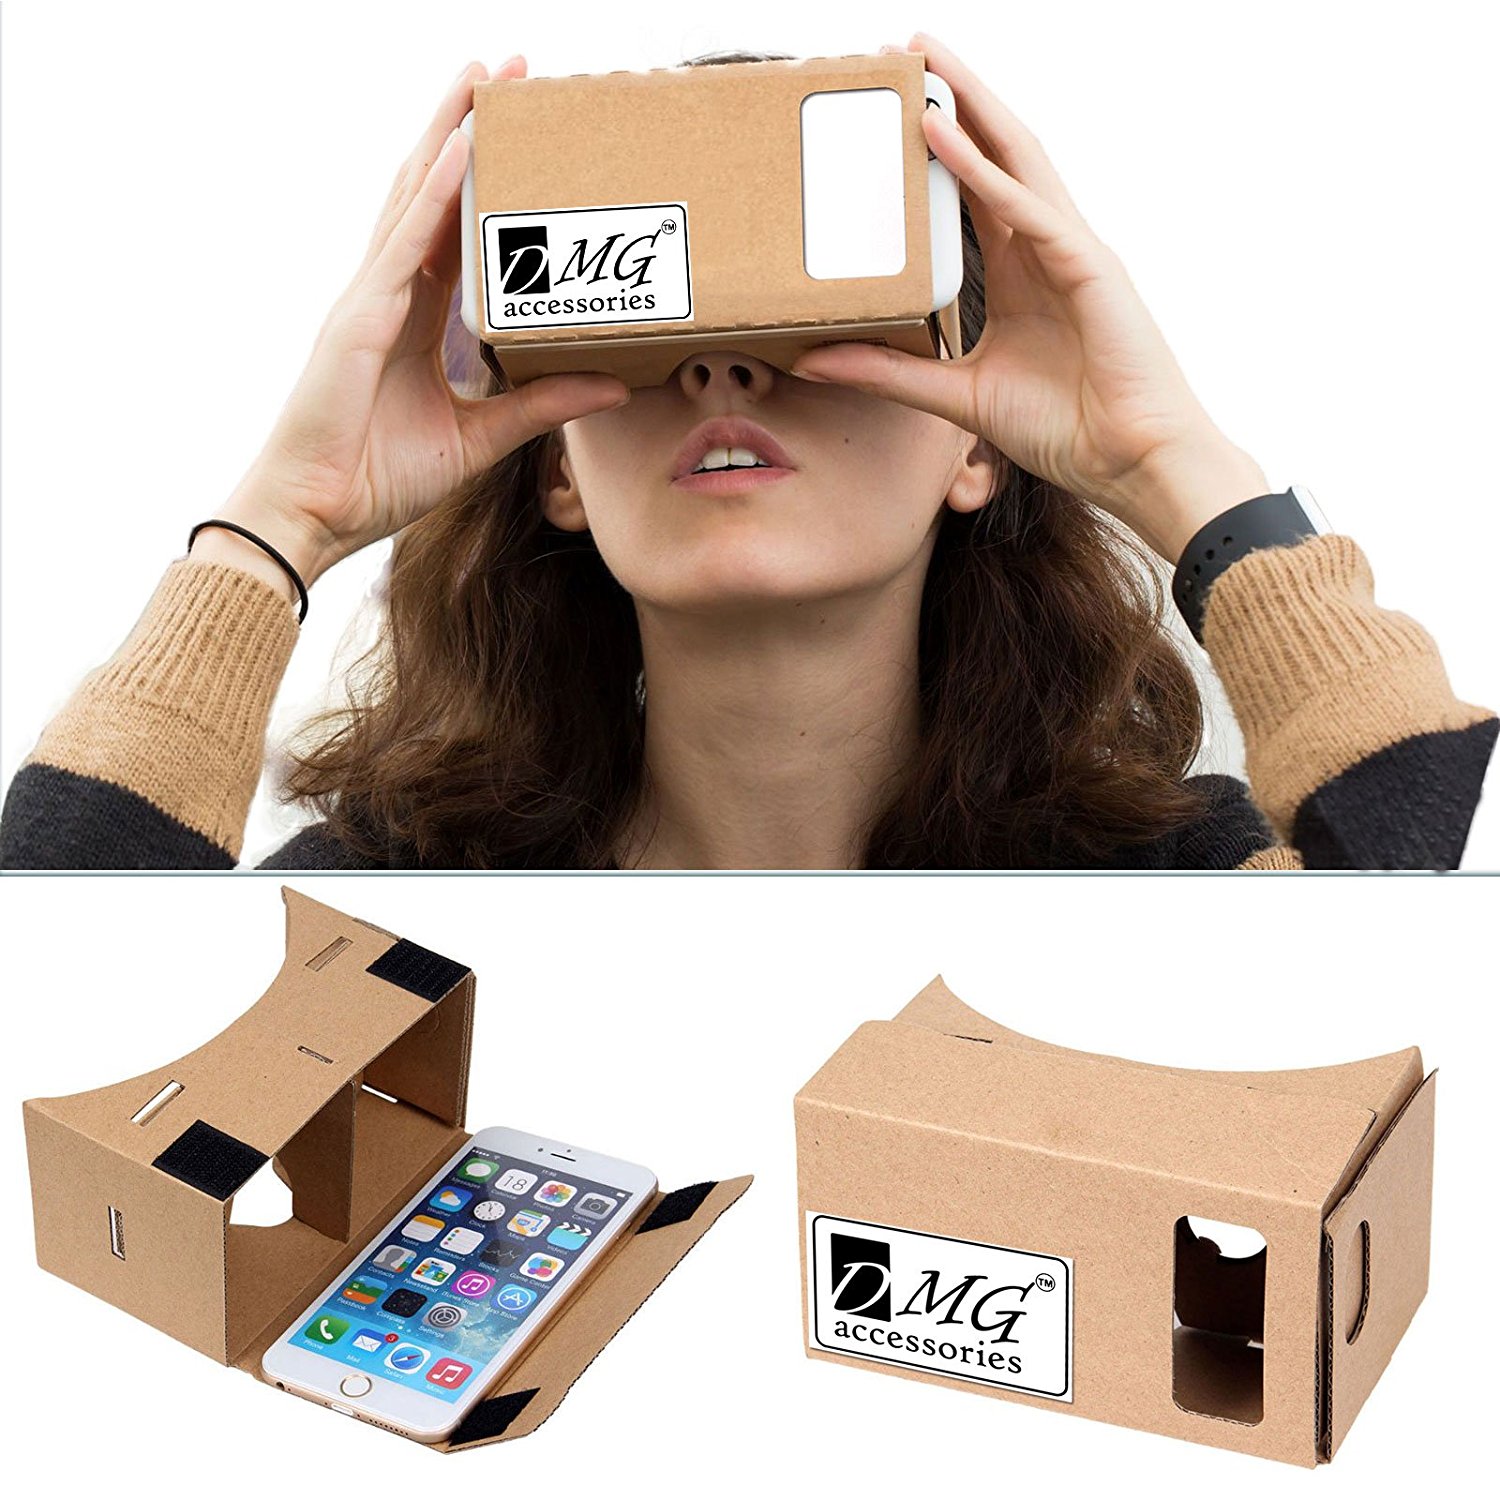 Amazon Loot-Buy DMG VR Google Cardboard Kit with Straps In Just Rs.149 (Worth Rs.699)